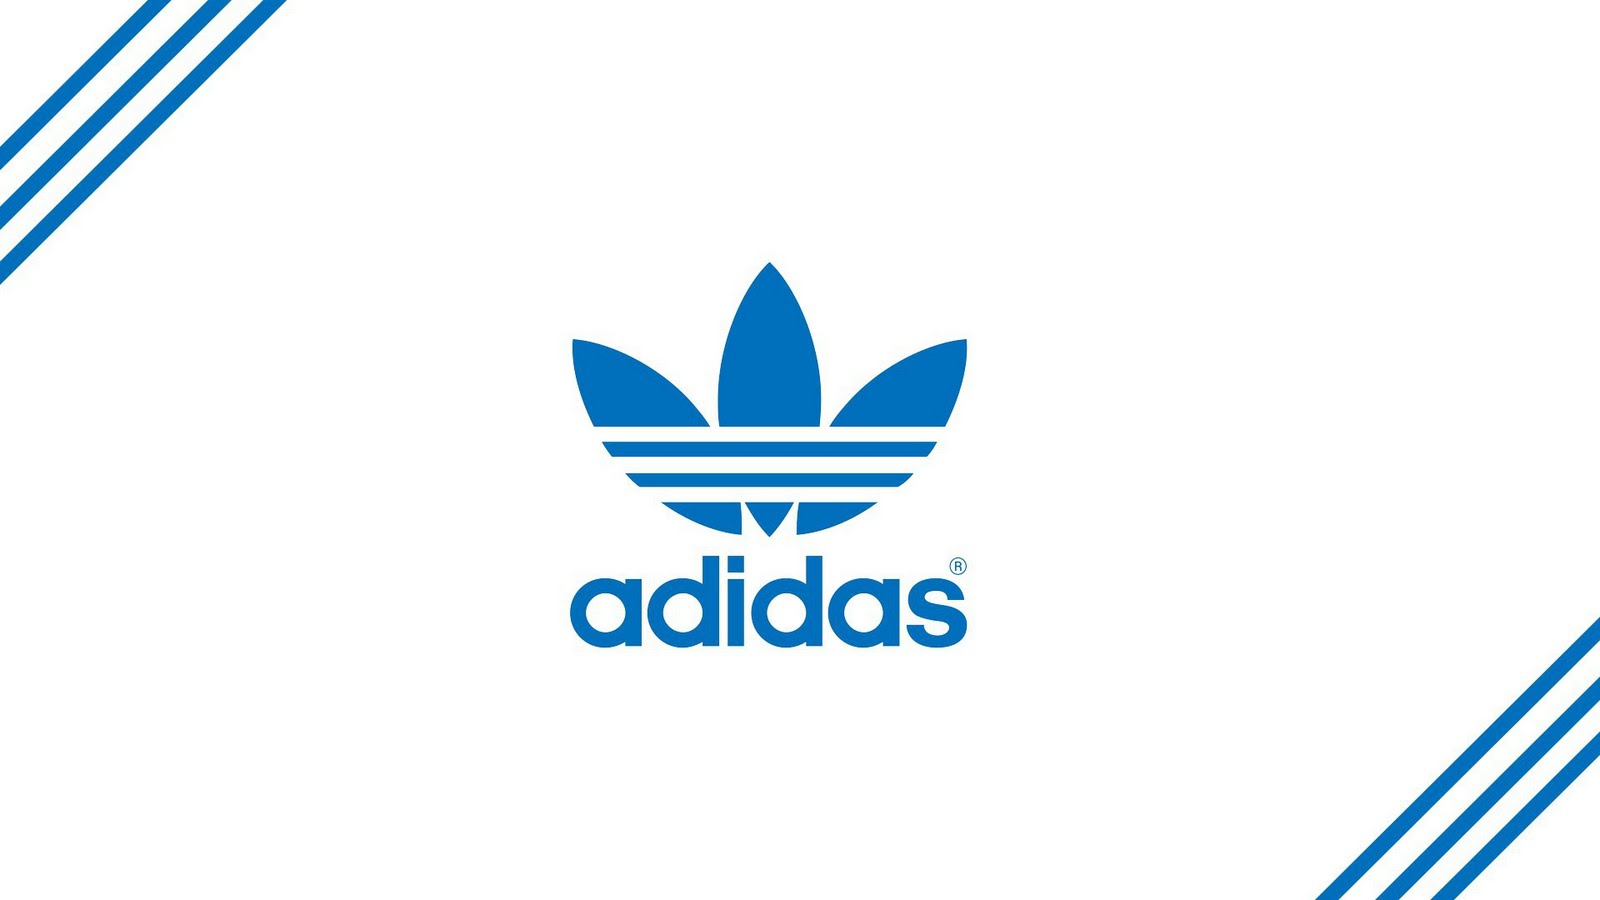 To Adidas Logo Wallpaper Click On Full Size And Then Right